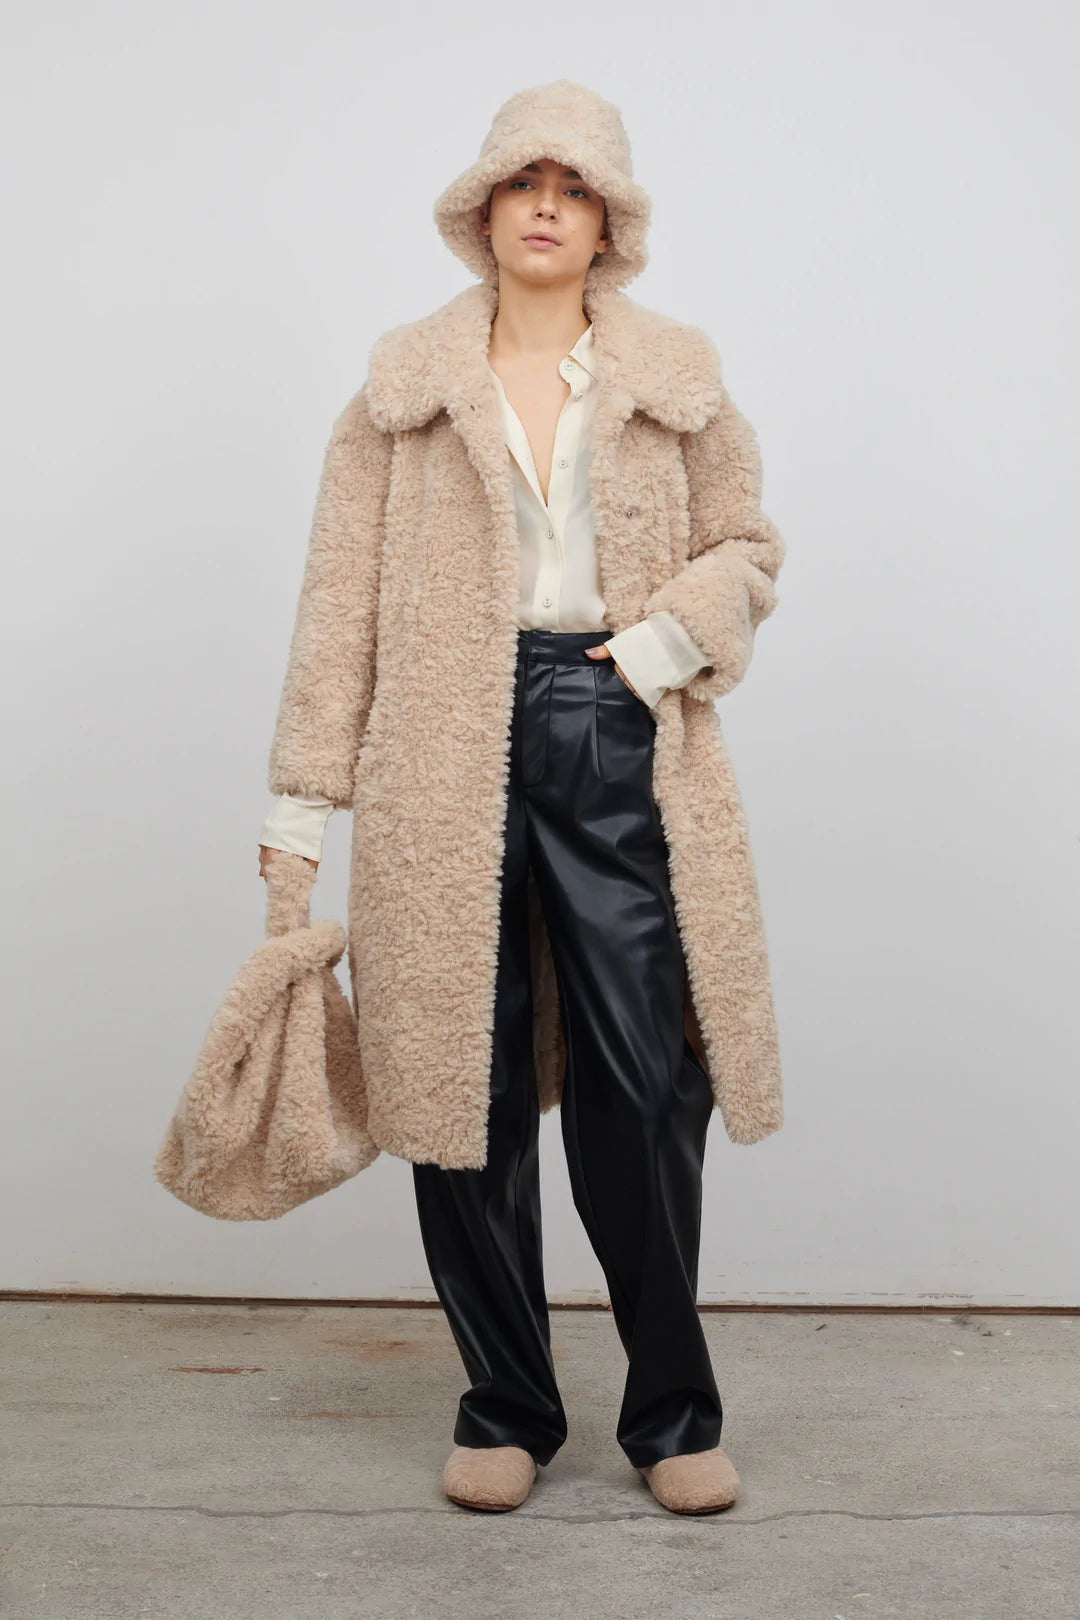 Midi length faux fur coat with large collar V neck and three popper fastenings